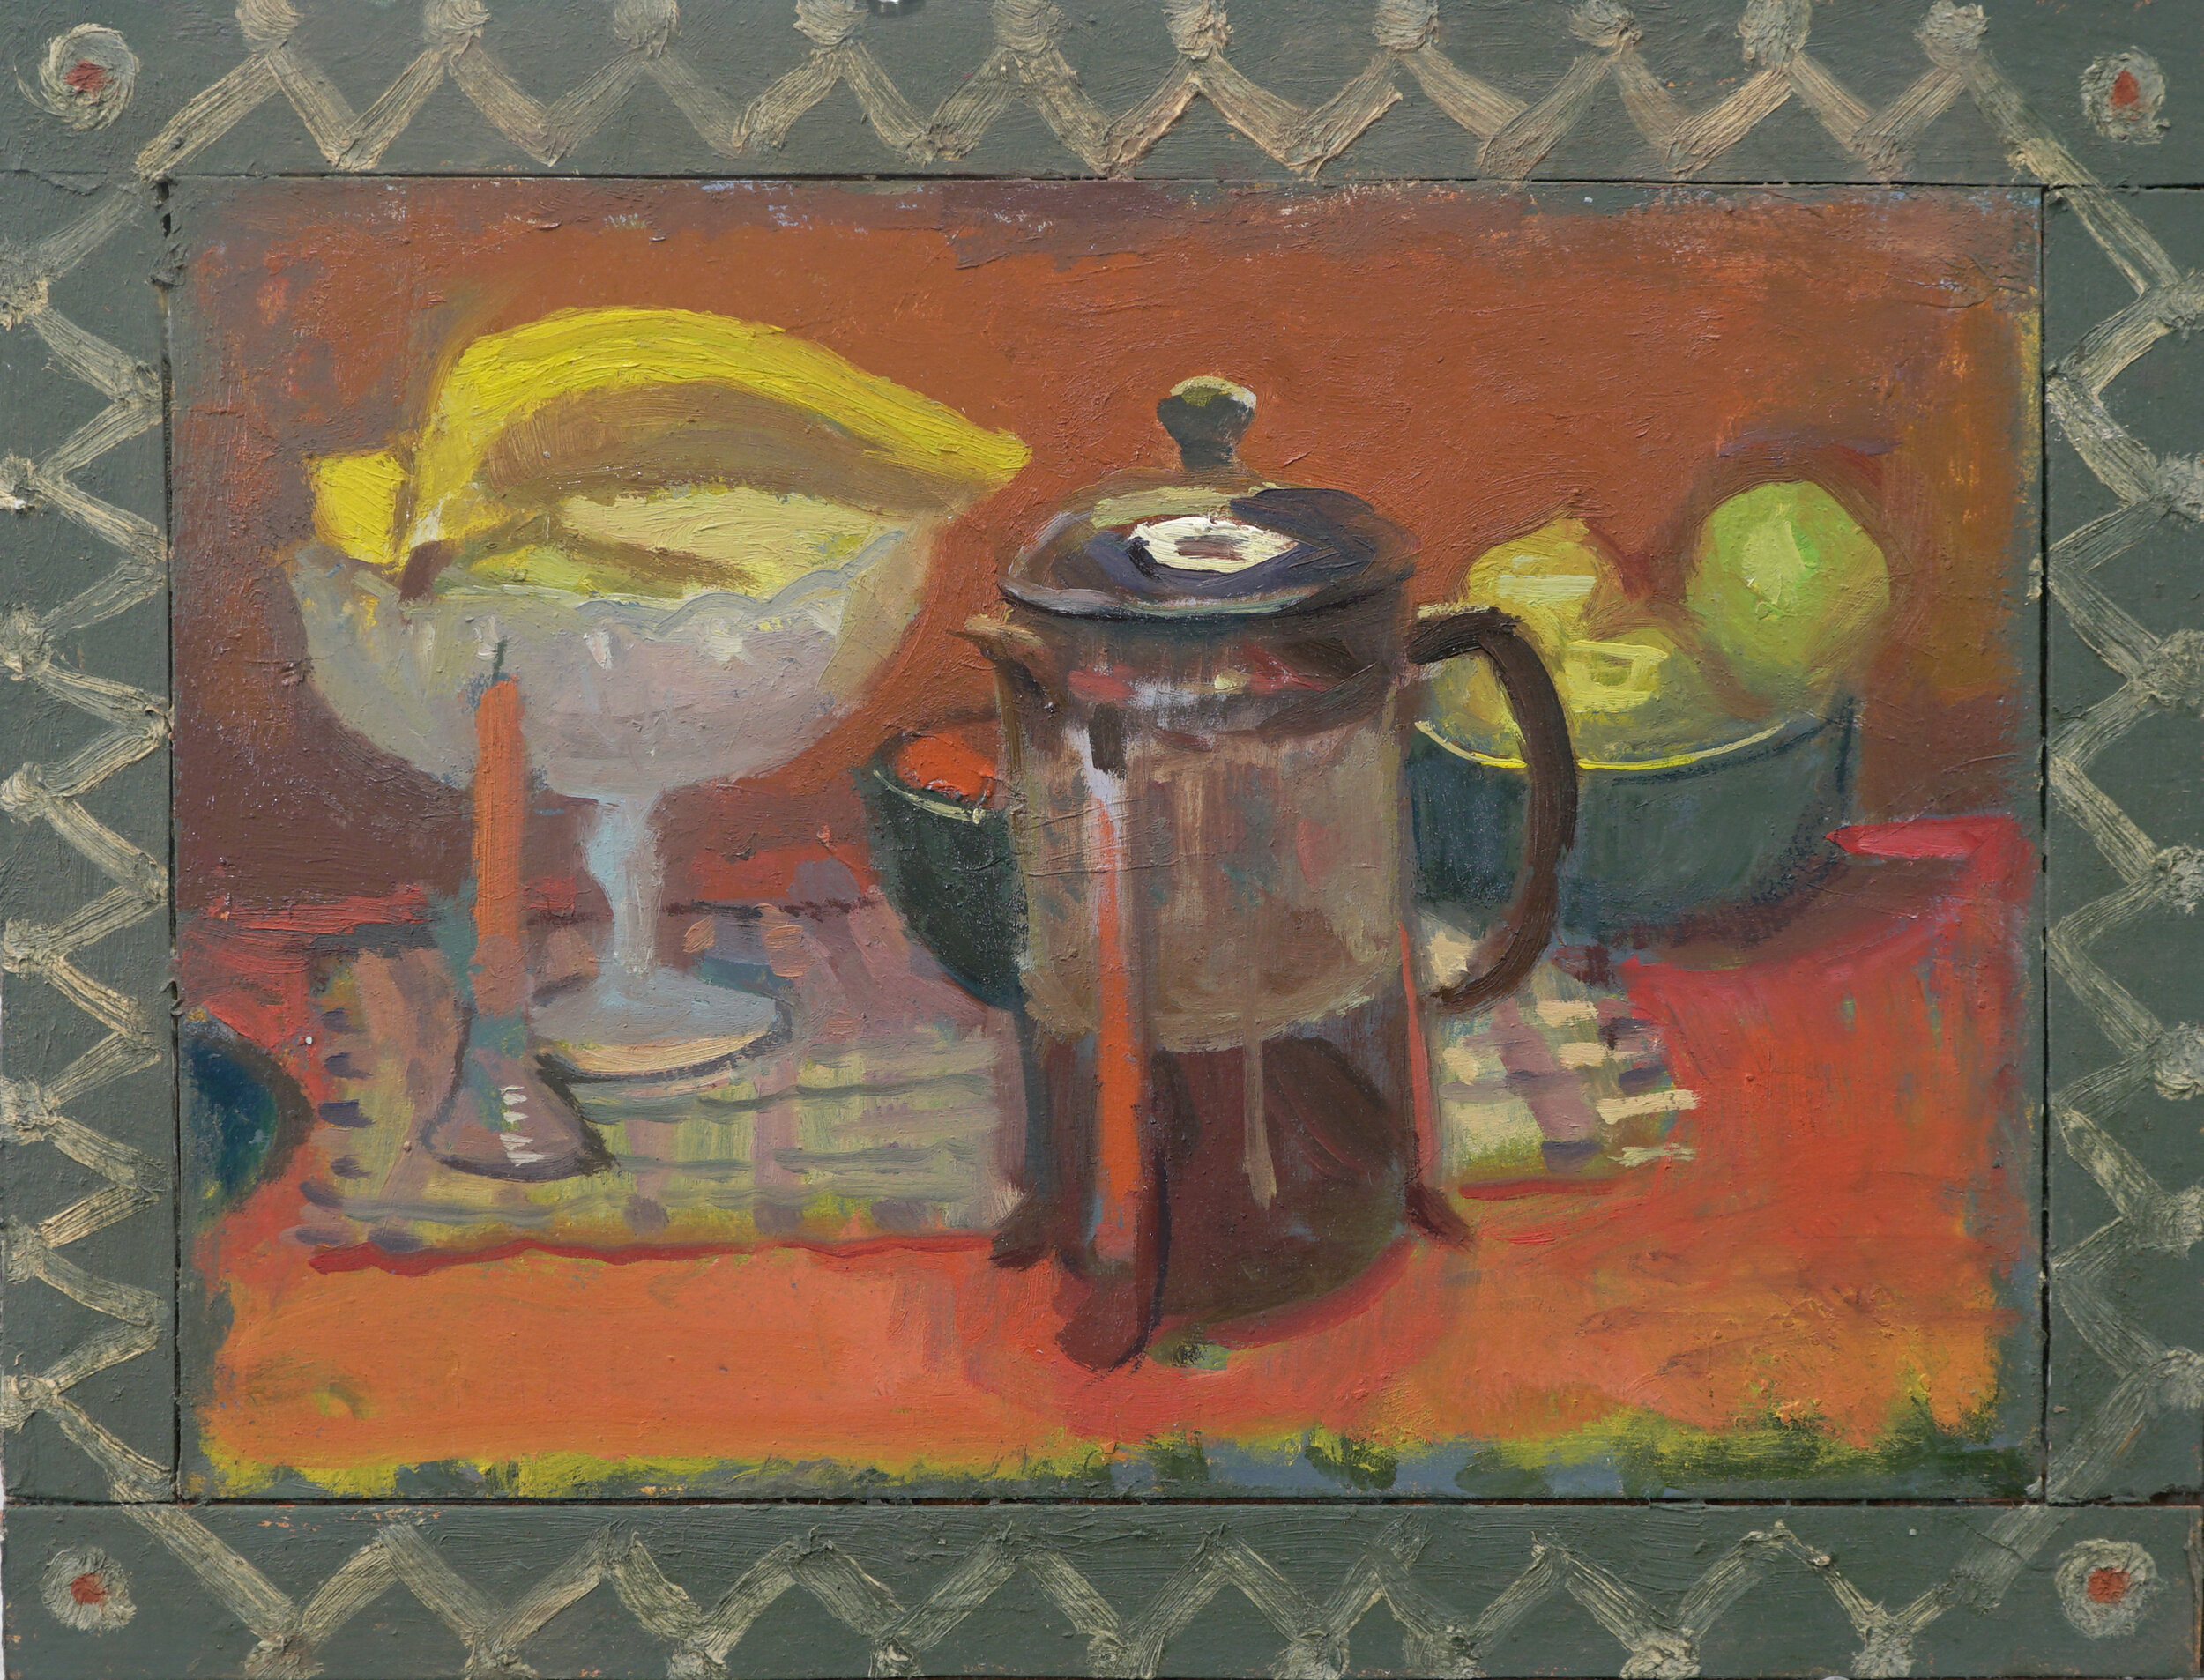 French Press, Oil on Museum-Board, 2019